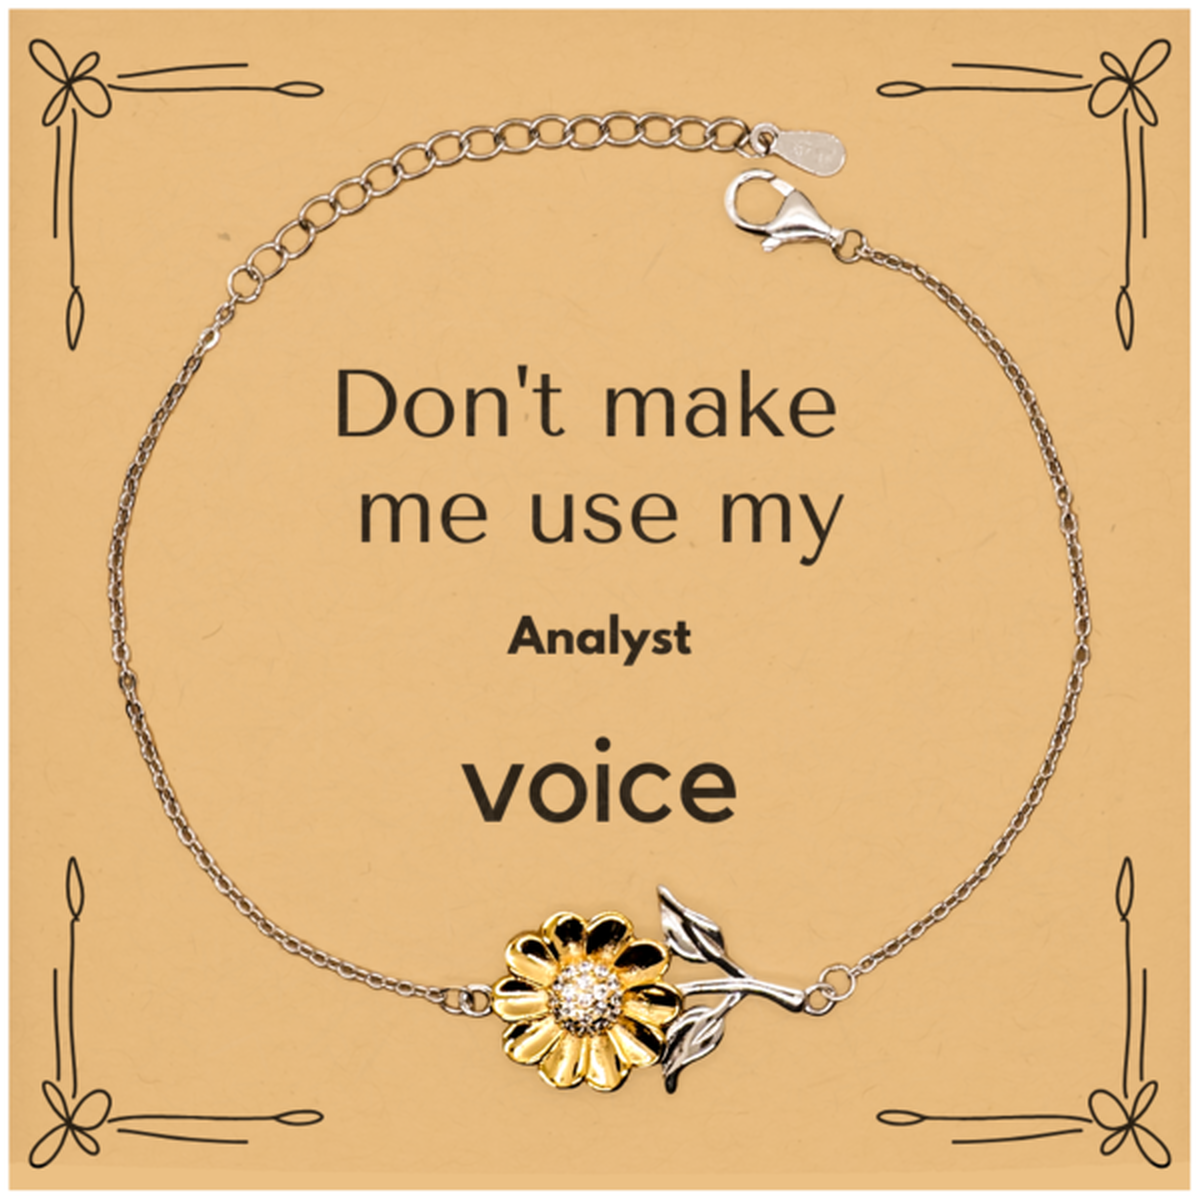 Don't make me use my Analyst voice, Sarcasm Analyst Card Gifts, Christmas Analyst Sunflower Bracelet Birthday Unique Gifts For Analyst Coworkers, Men, Women, Colleague, Friends